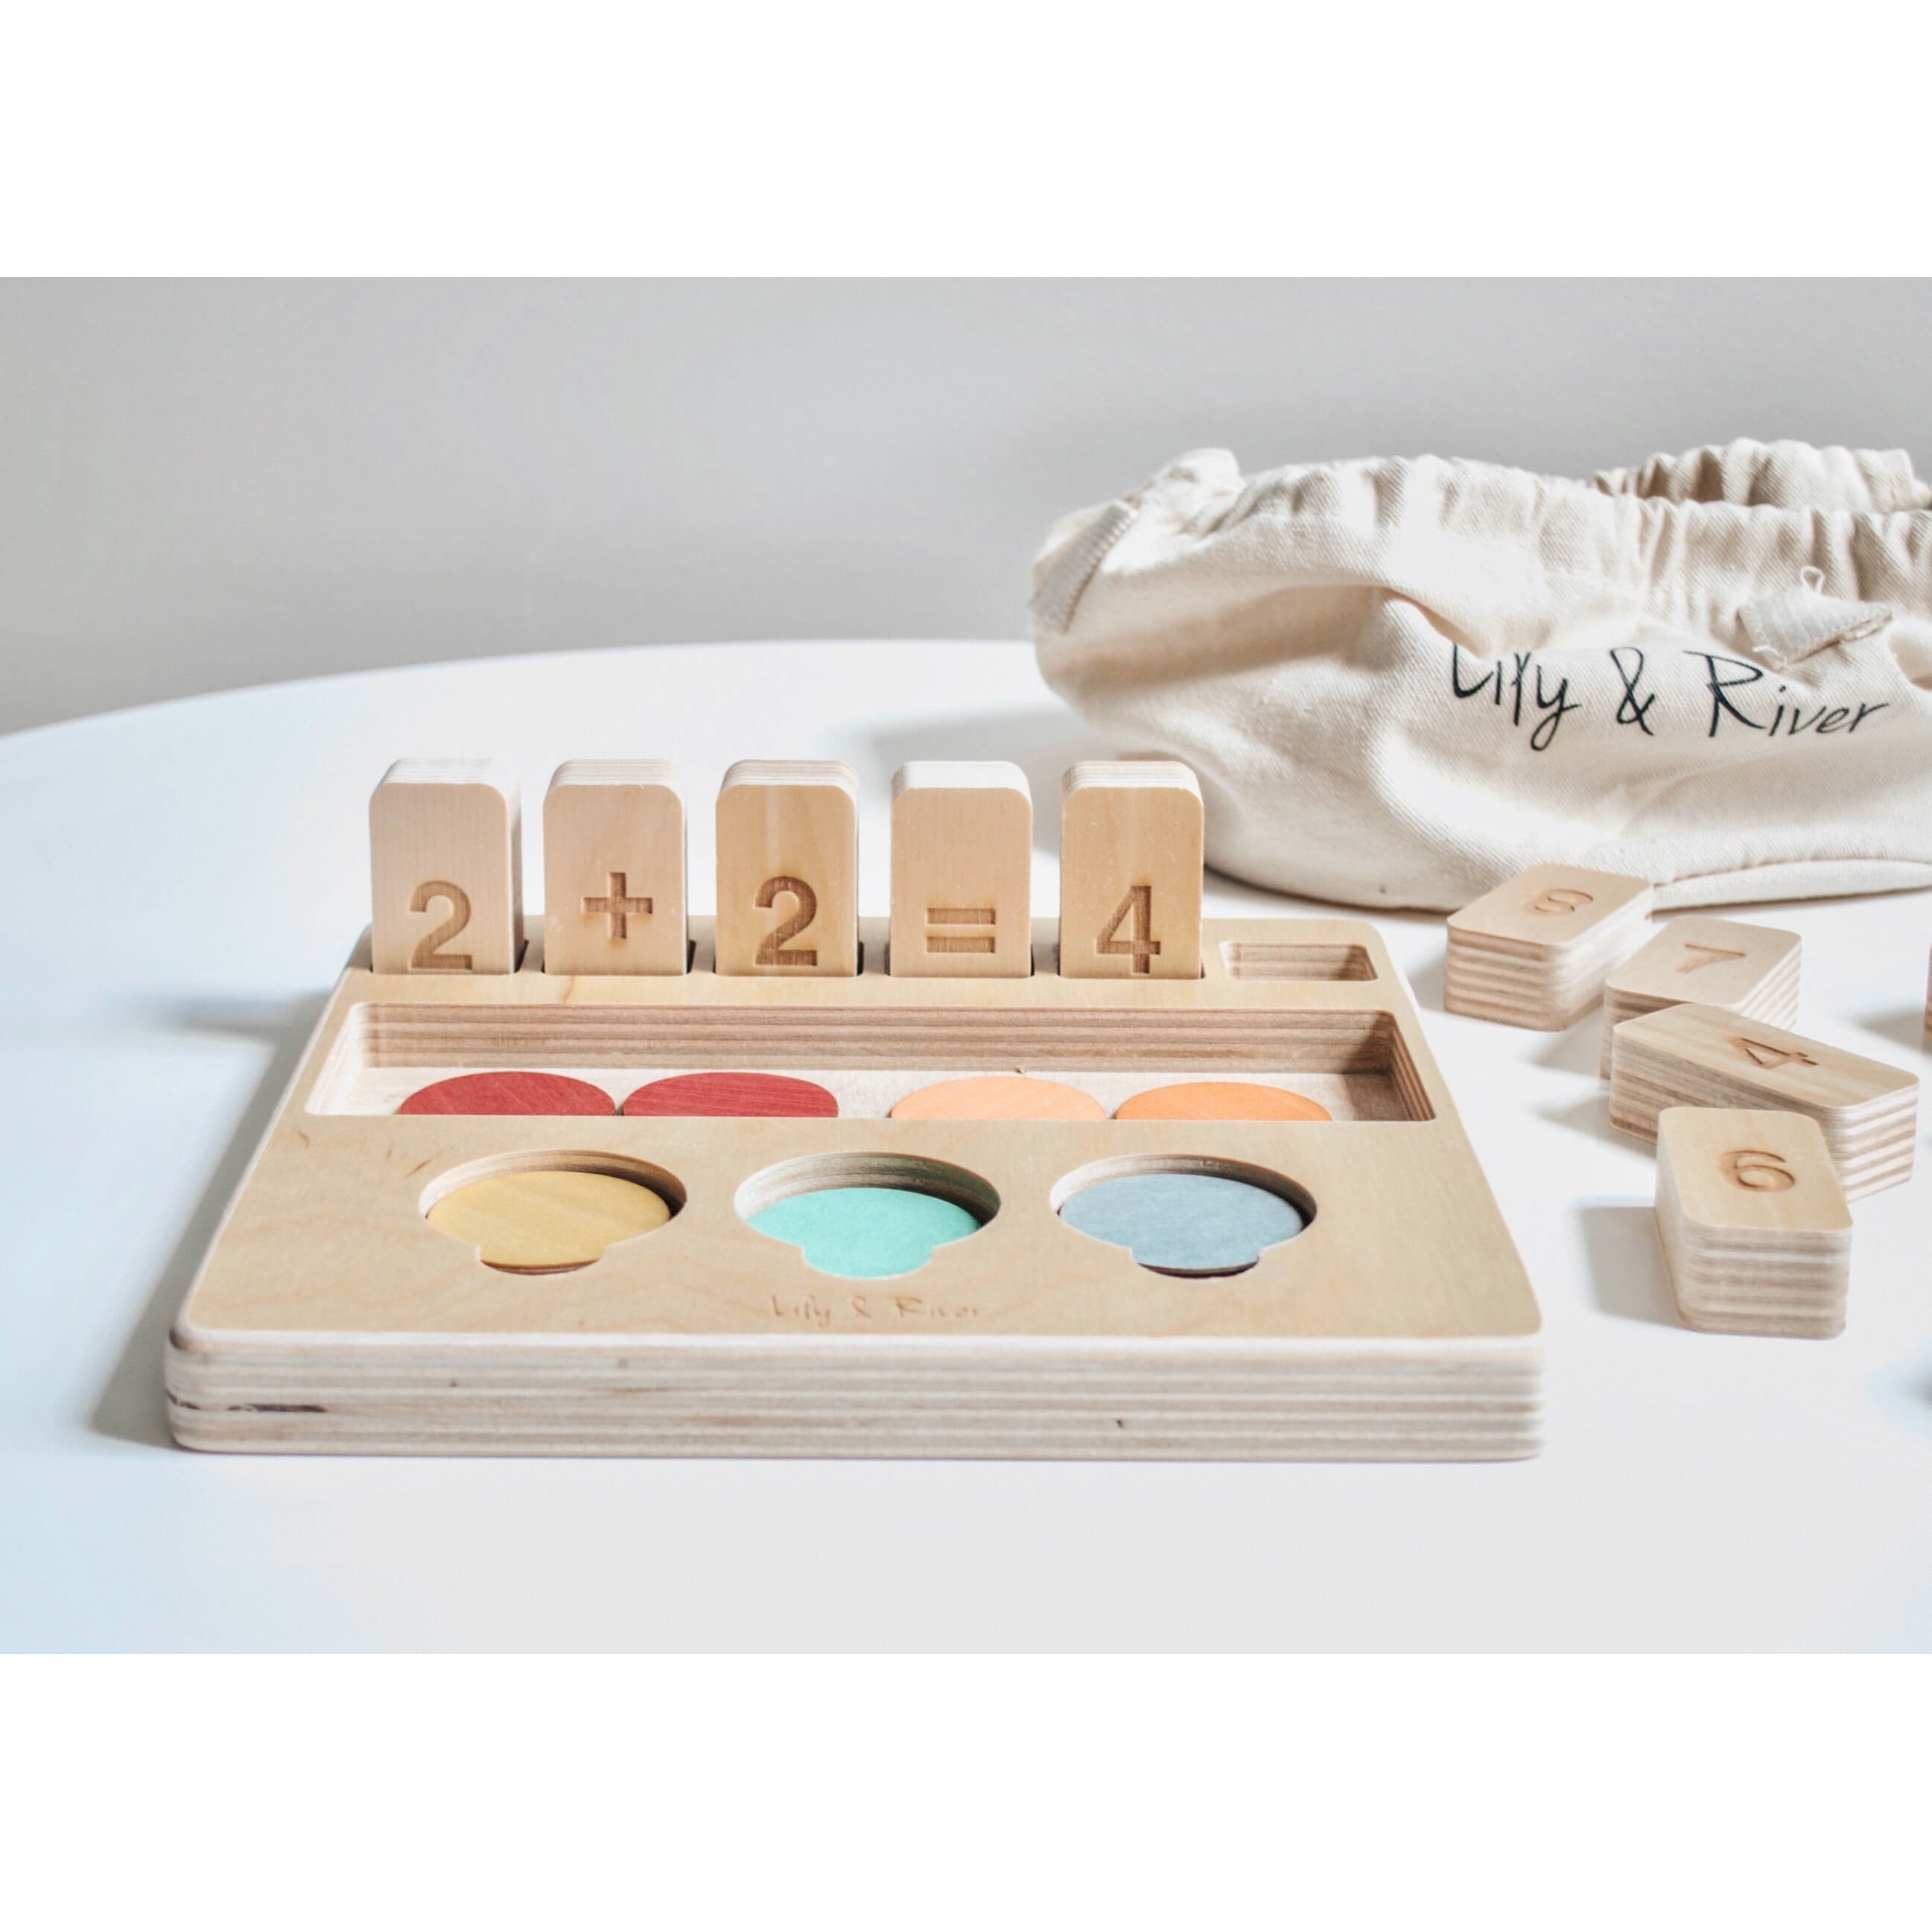 Lily & River Little Numbers Math Toys